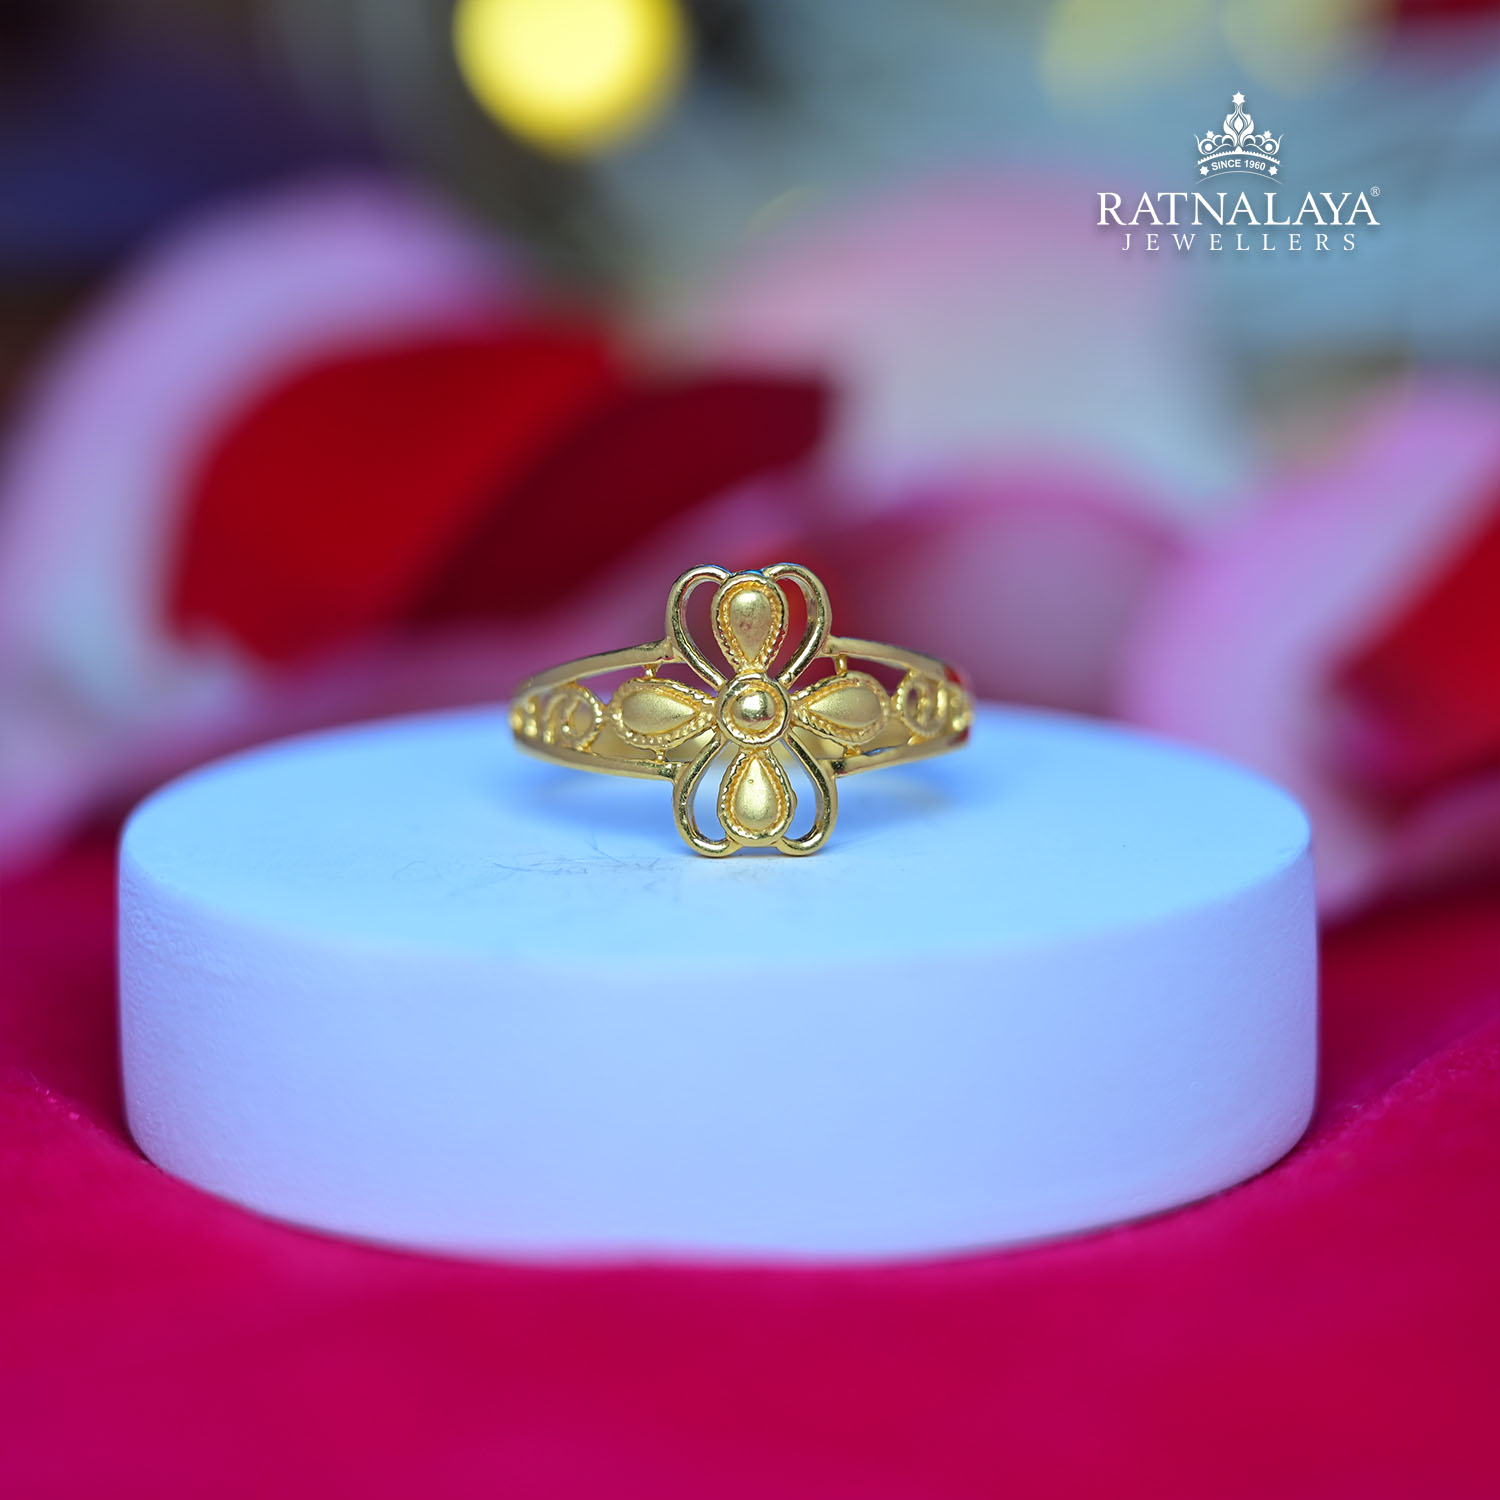 Baby Ring Archives - Rupashree Jewellers (RB)